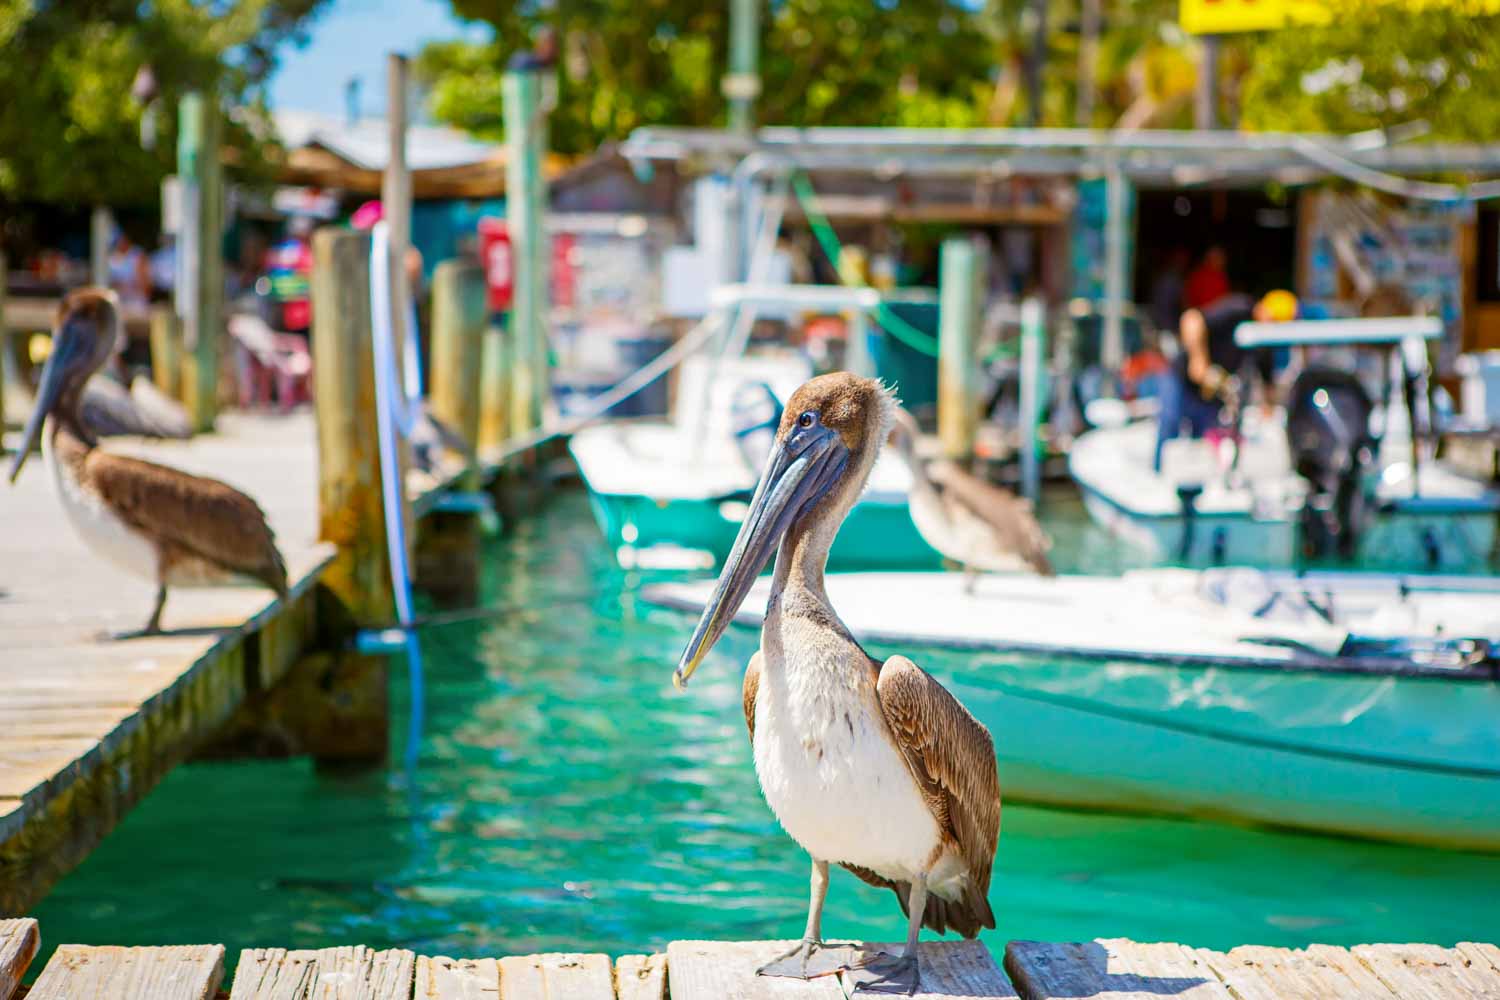 Big brown pelicans waiting for fish at Robbie's Marina in Islamorada - one of the unmissable stops on a Florida Keys road trip